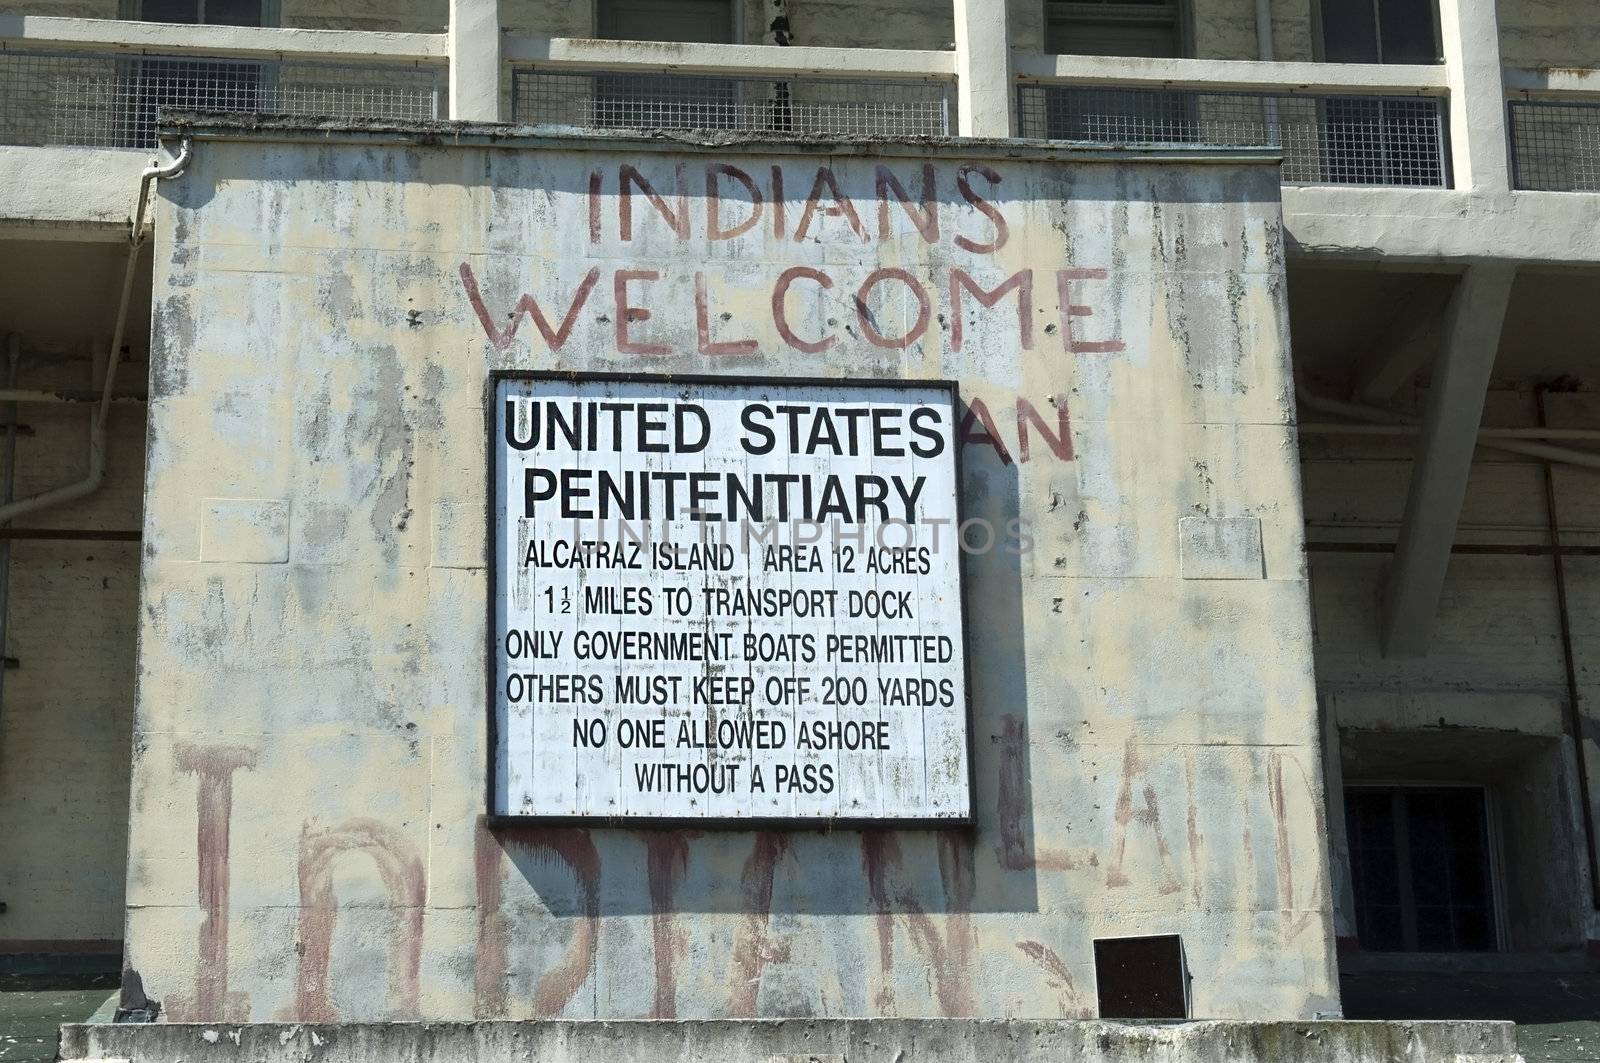 Alcatraz jail , graffiti painted on walls from the days of occupation by the American Indian Movement in the 1970s